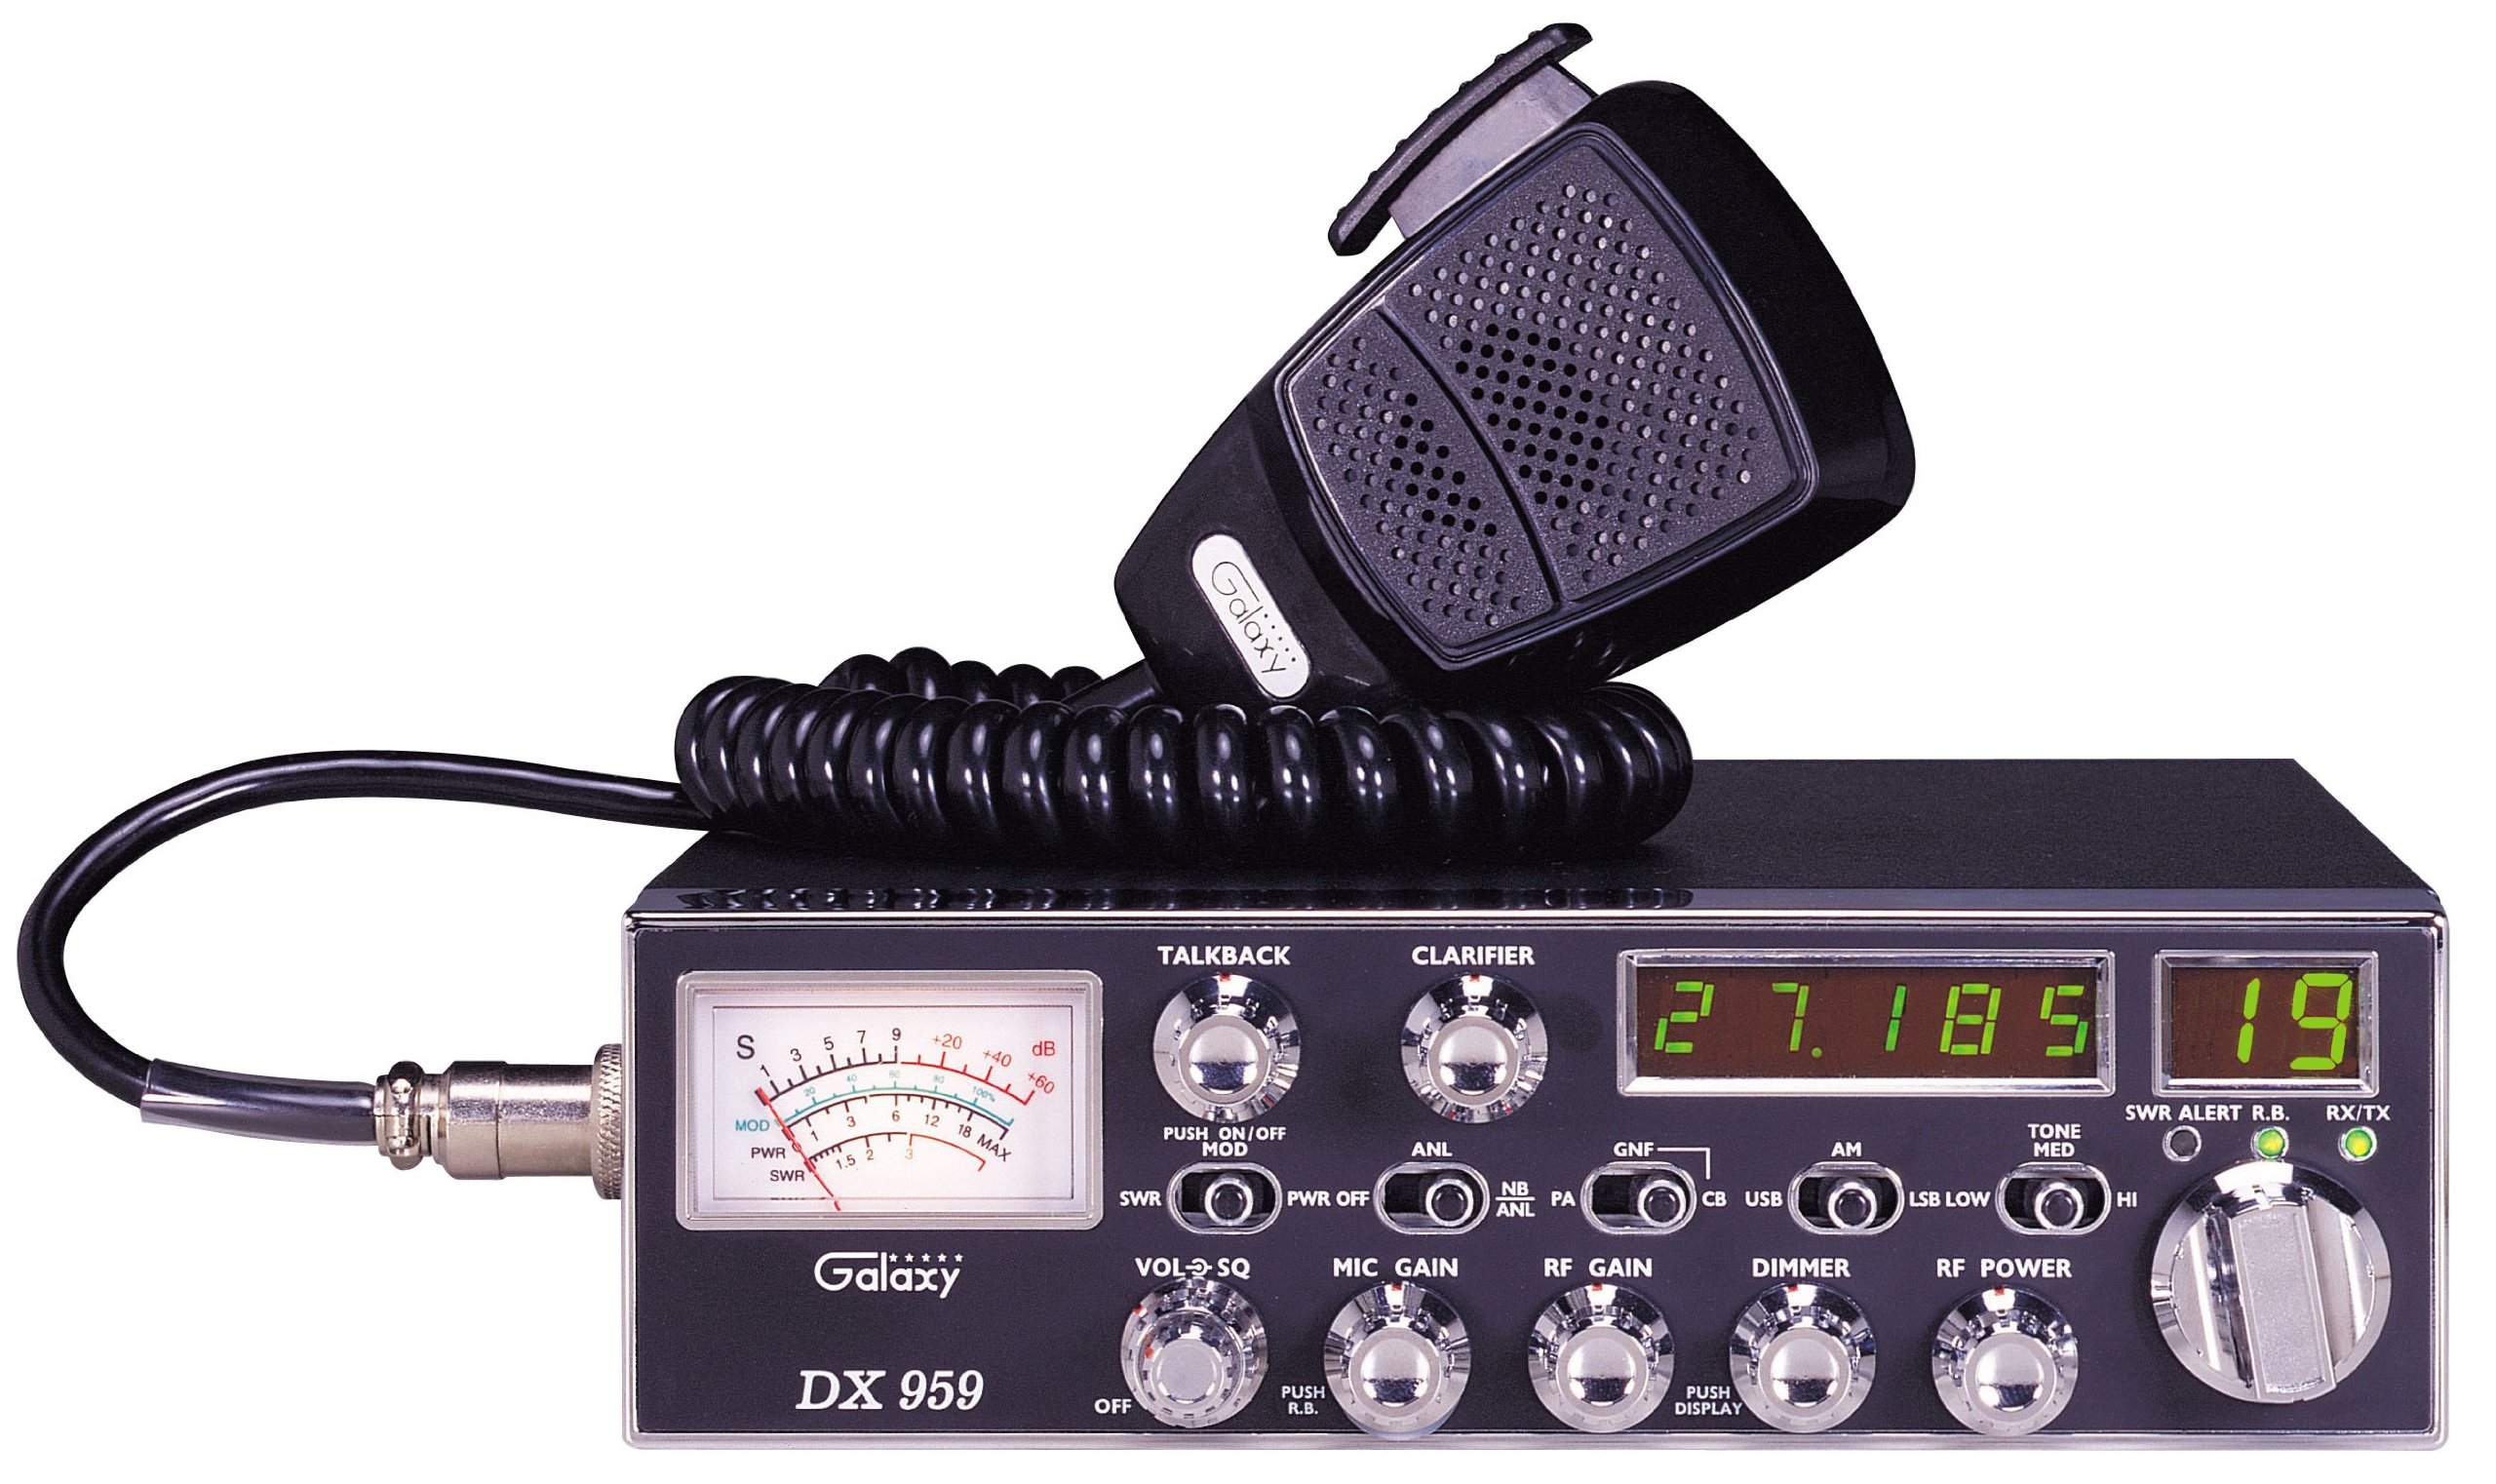 Galaxy Audio Galaxy-DX-959 40 Channel AM/SSB Mobile CB Radio with Frequency Counter